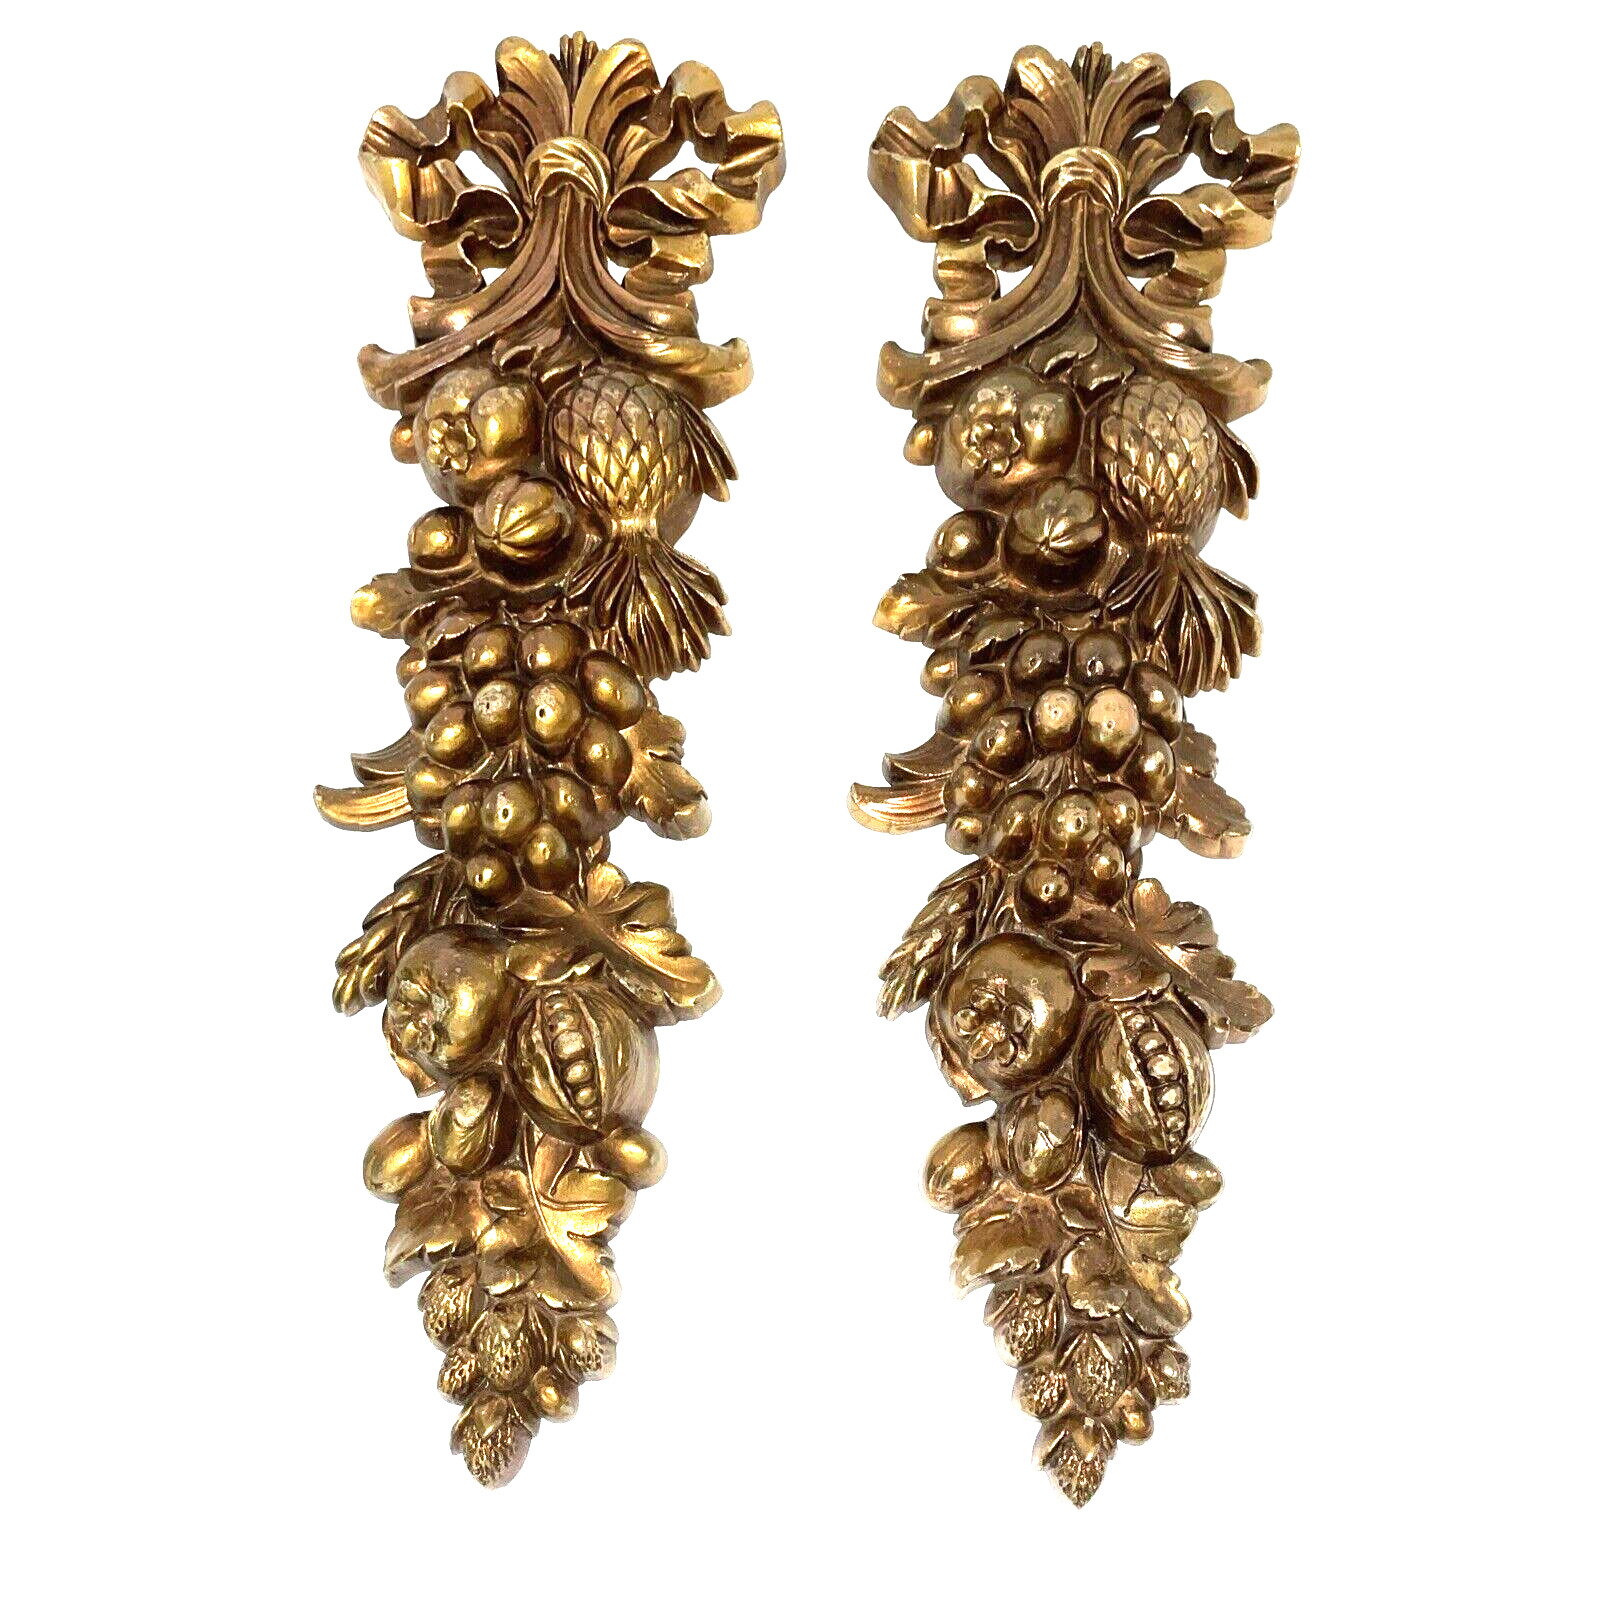 Pair Vintage Syroco Gold Hollywood Regency Fruit Wall Hangings Decor